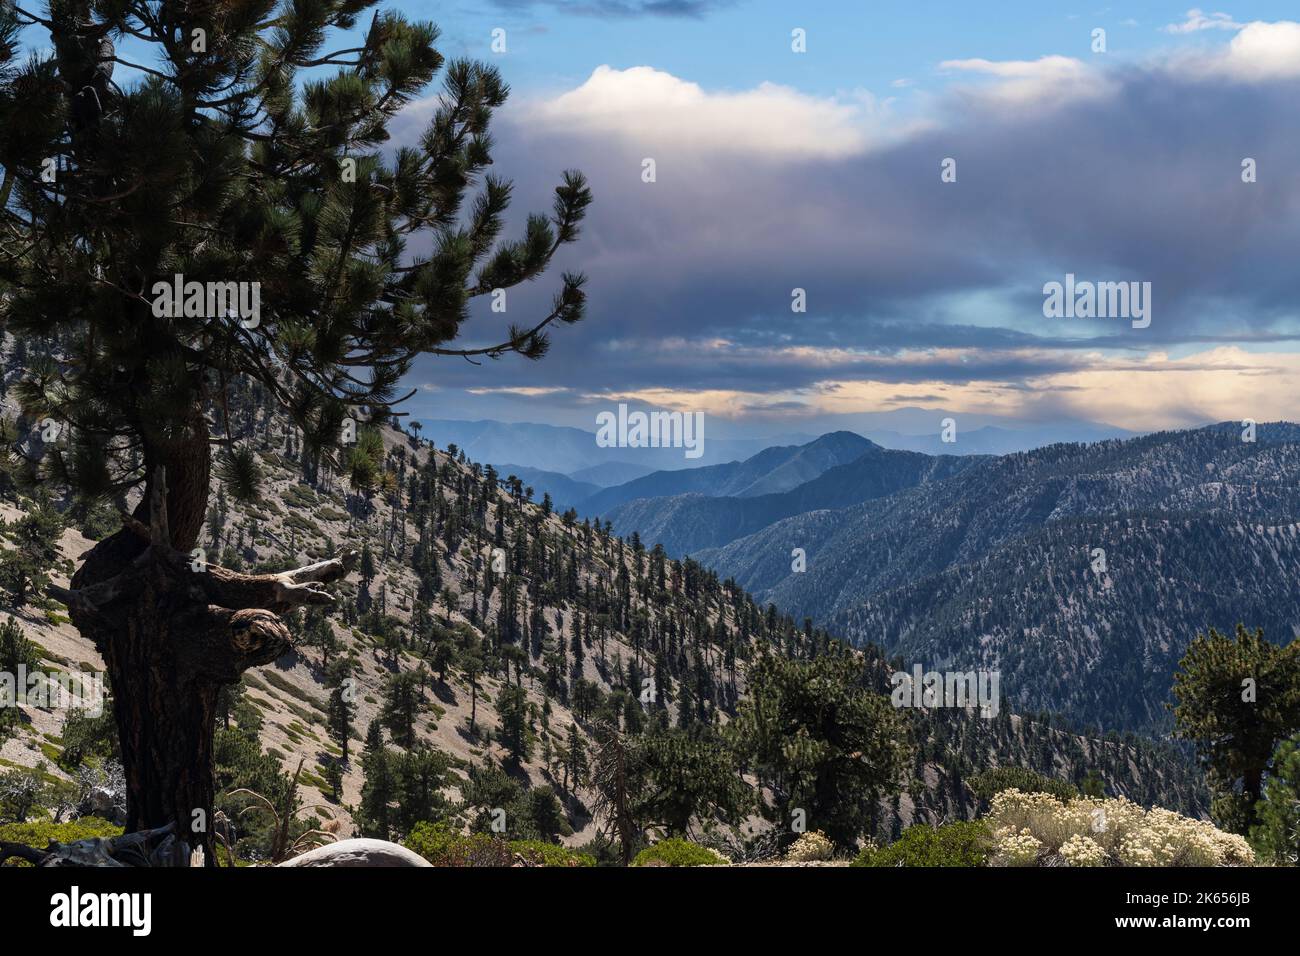 Forested slope near Mt Burnham and Mt Baden Powell in the San Gabriel Mountains of Southern California. Stock Photo